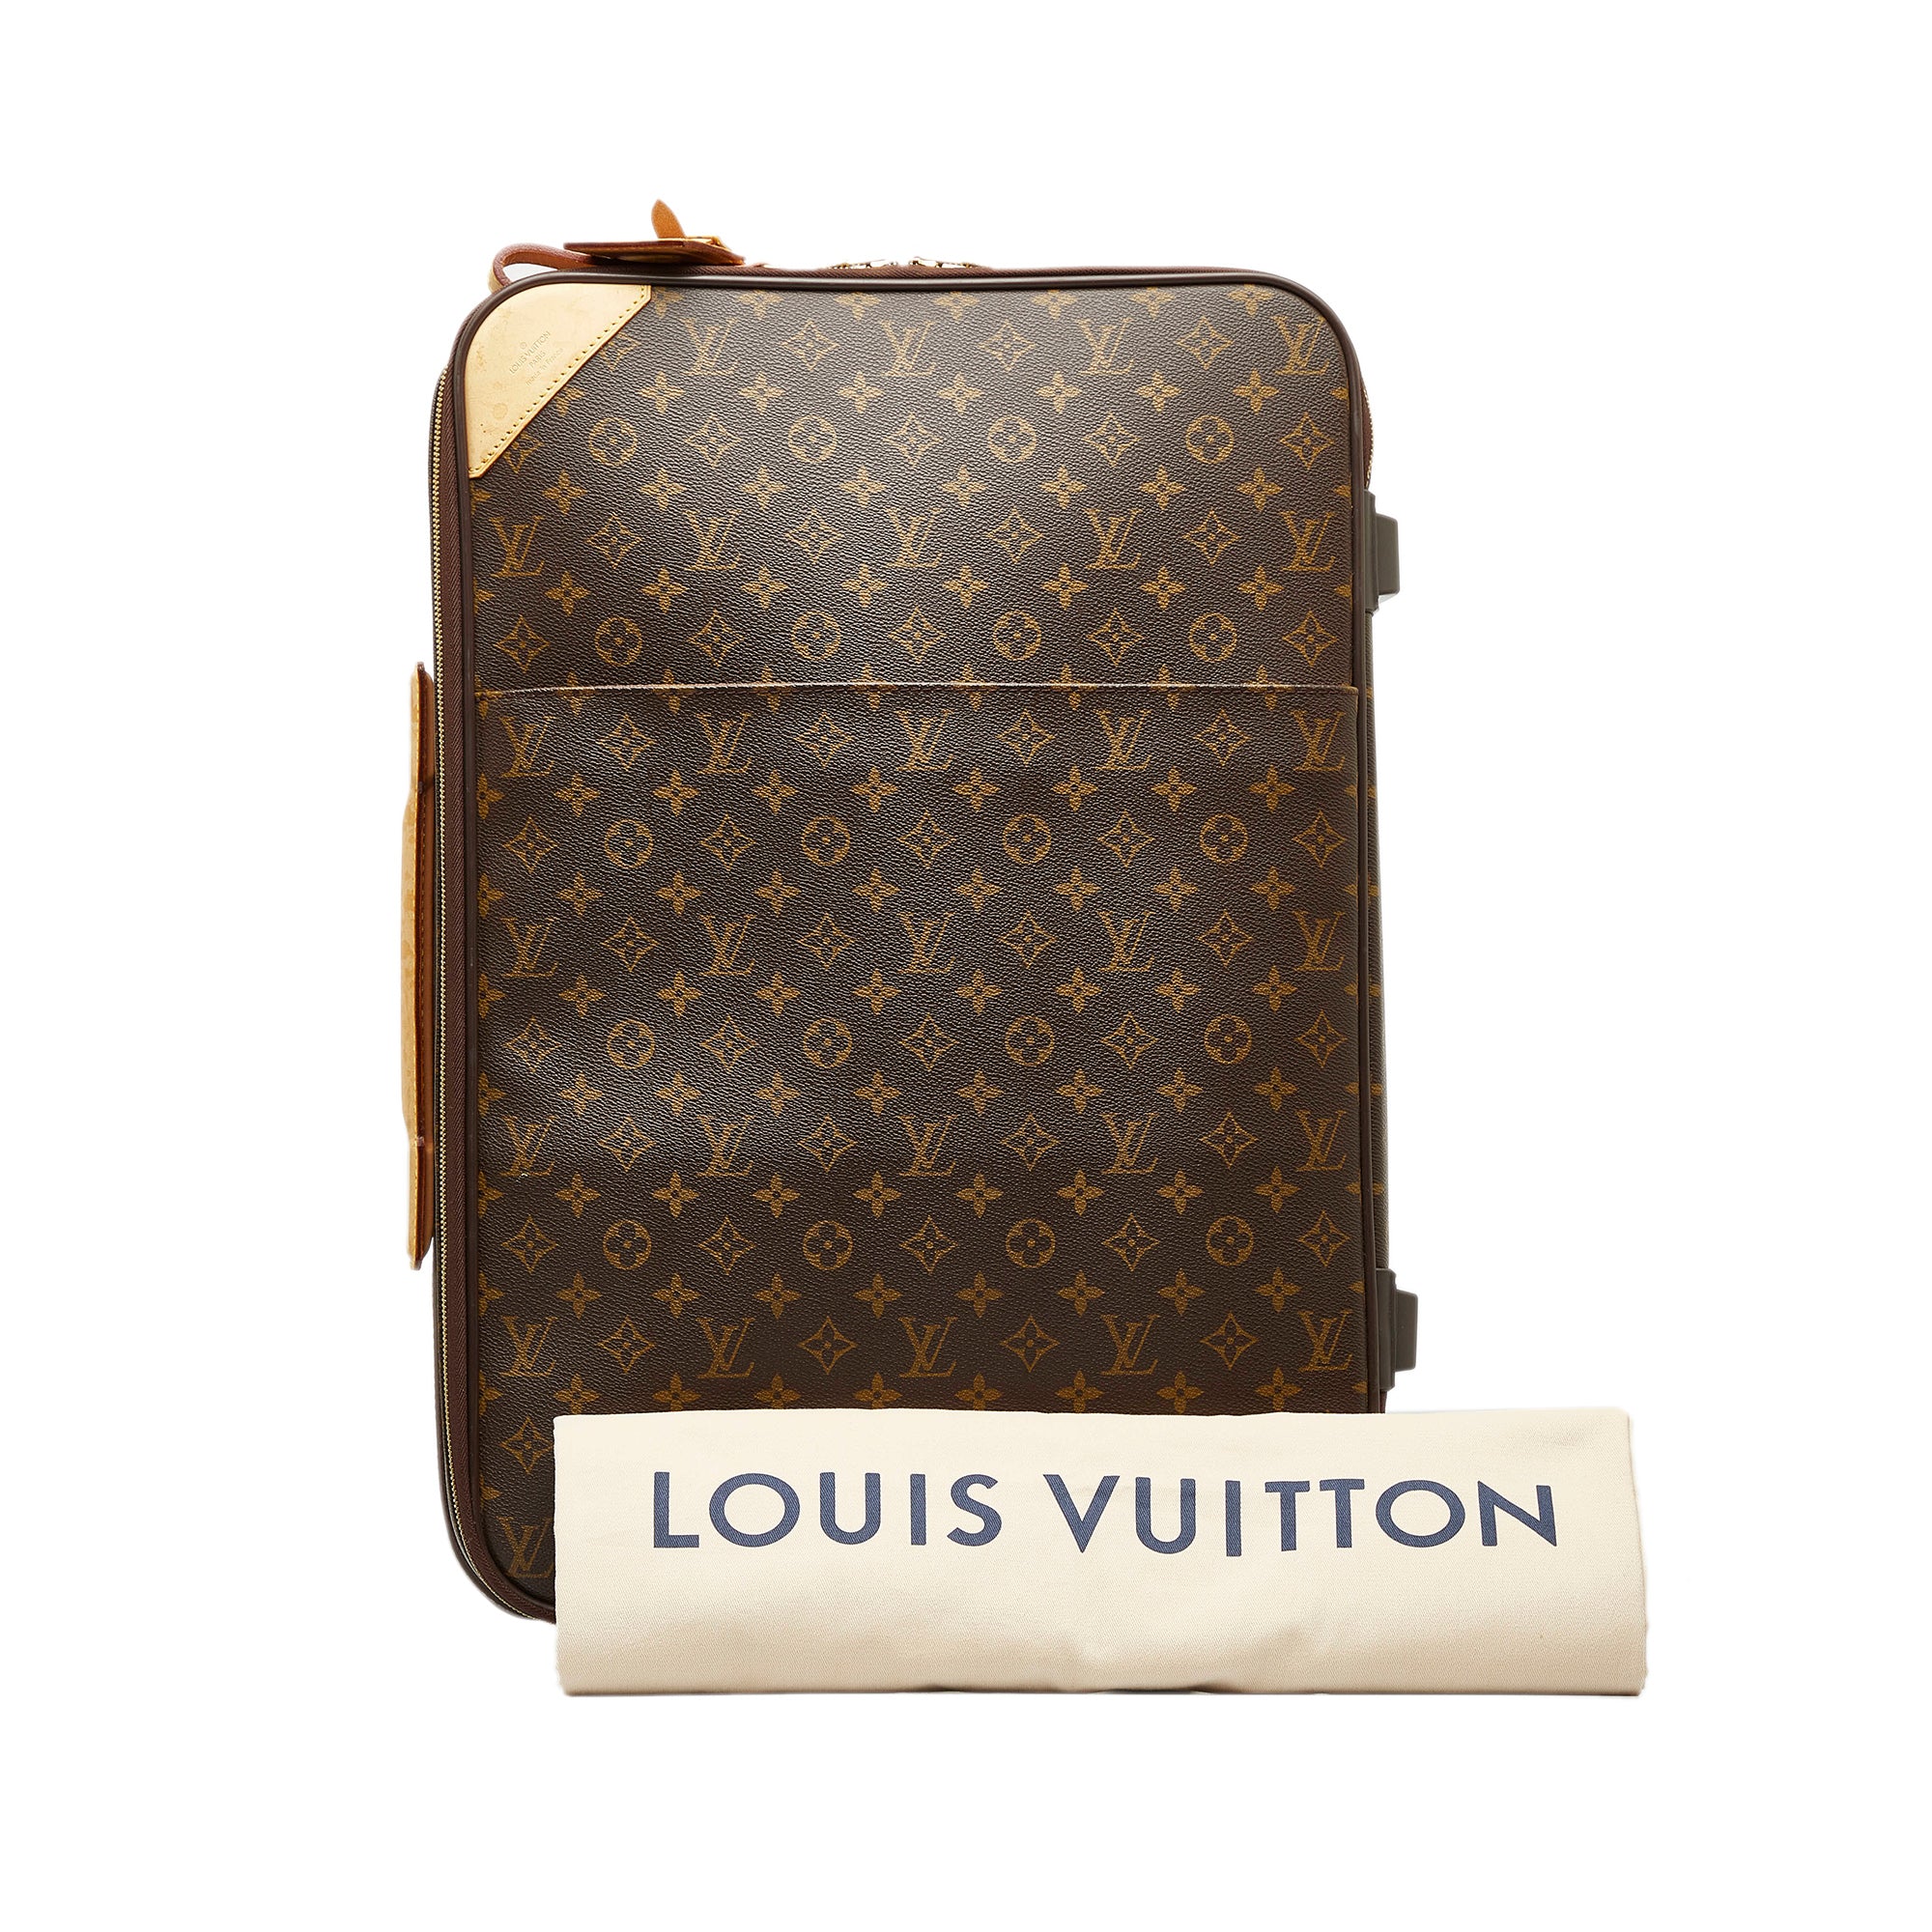 Get ready to travel in style! Louis Vuitton Pegase Suitcase gets a